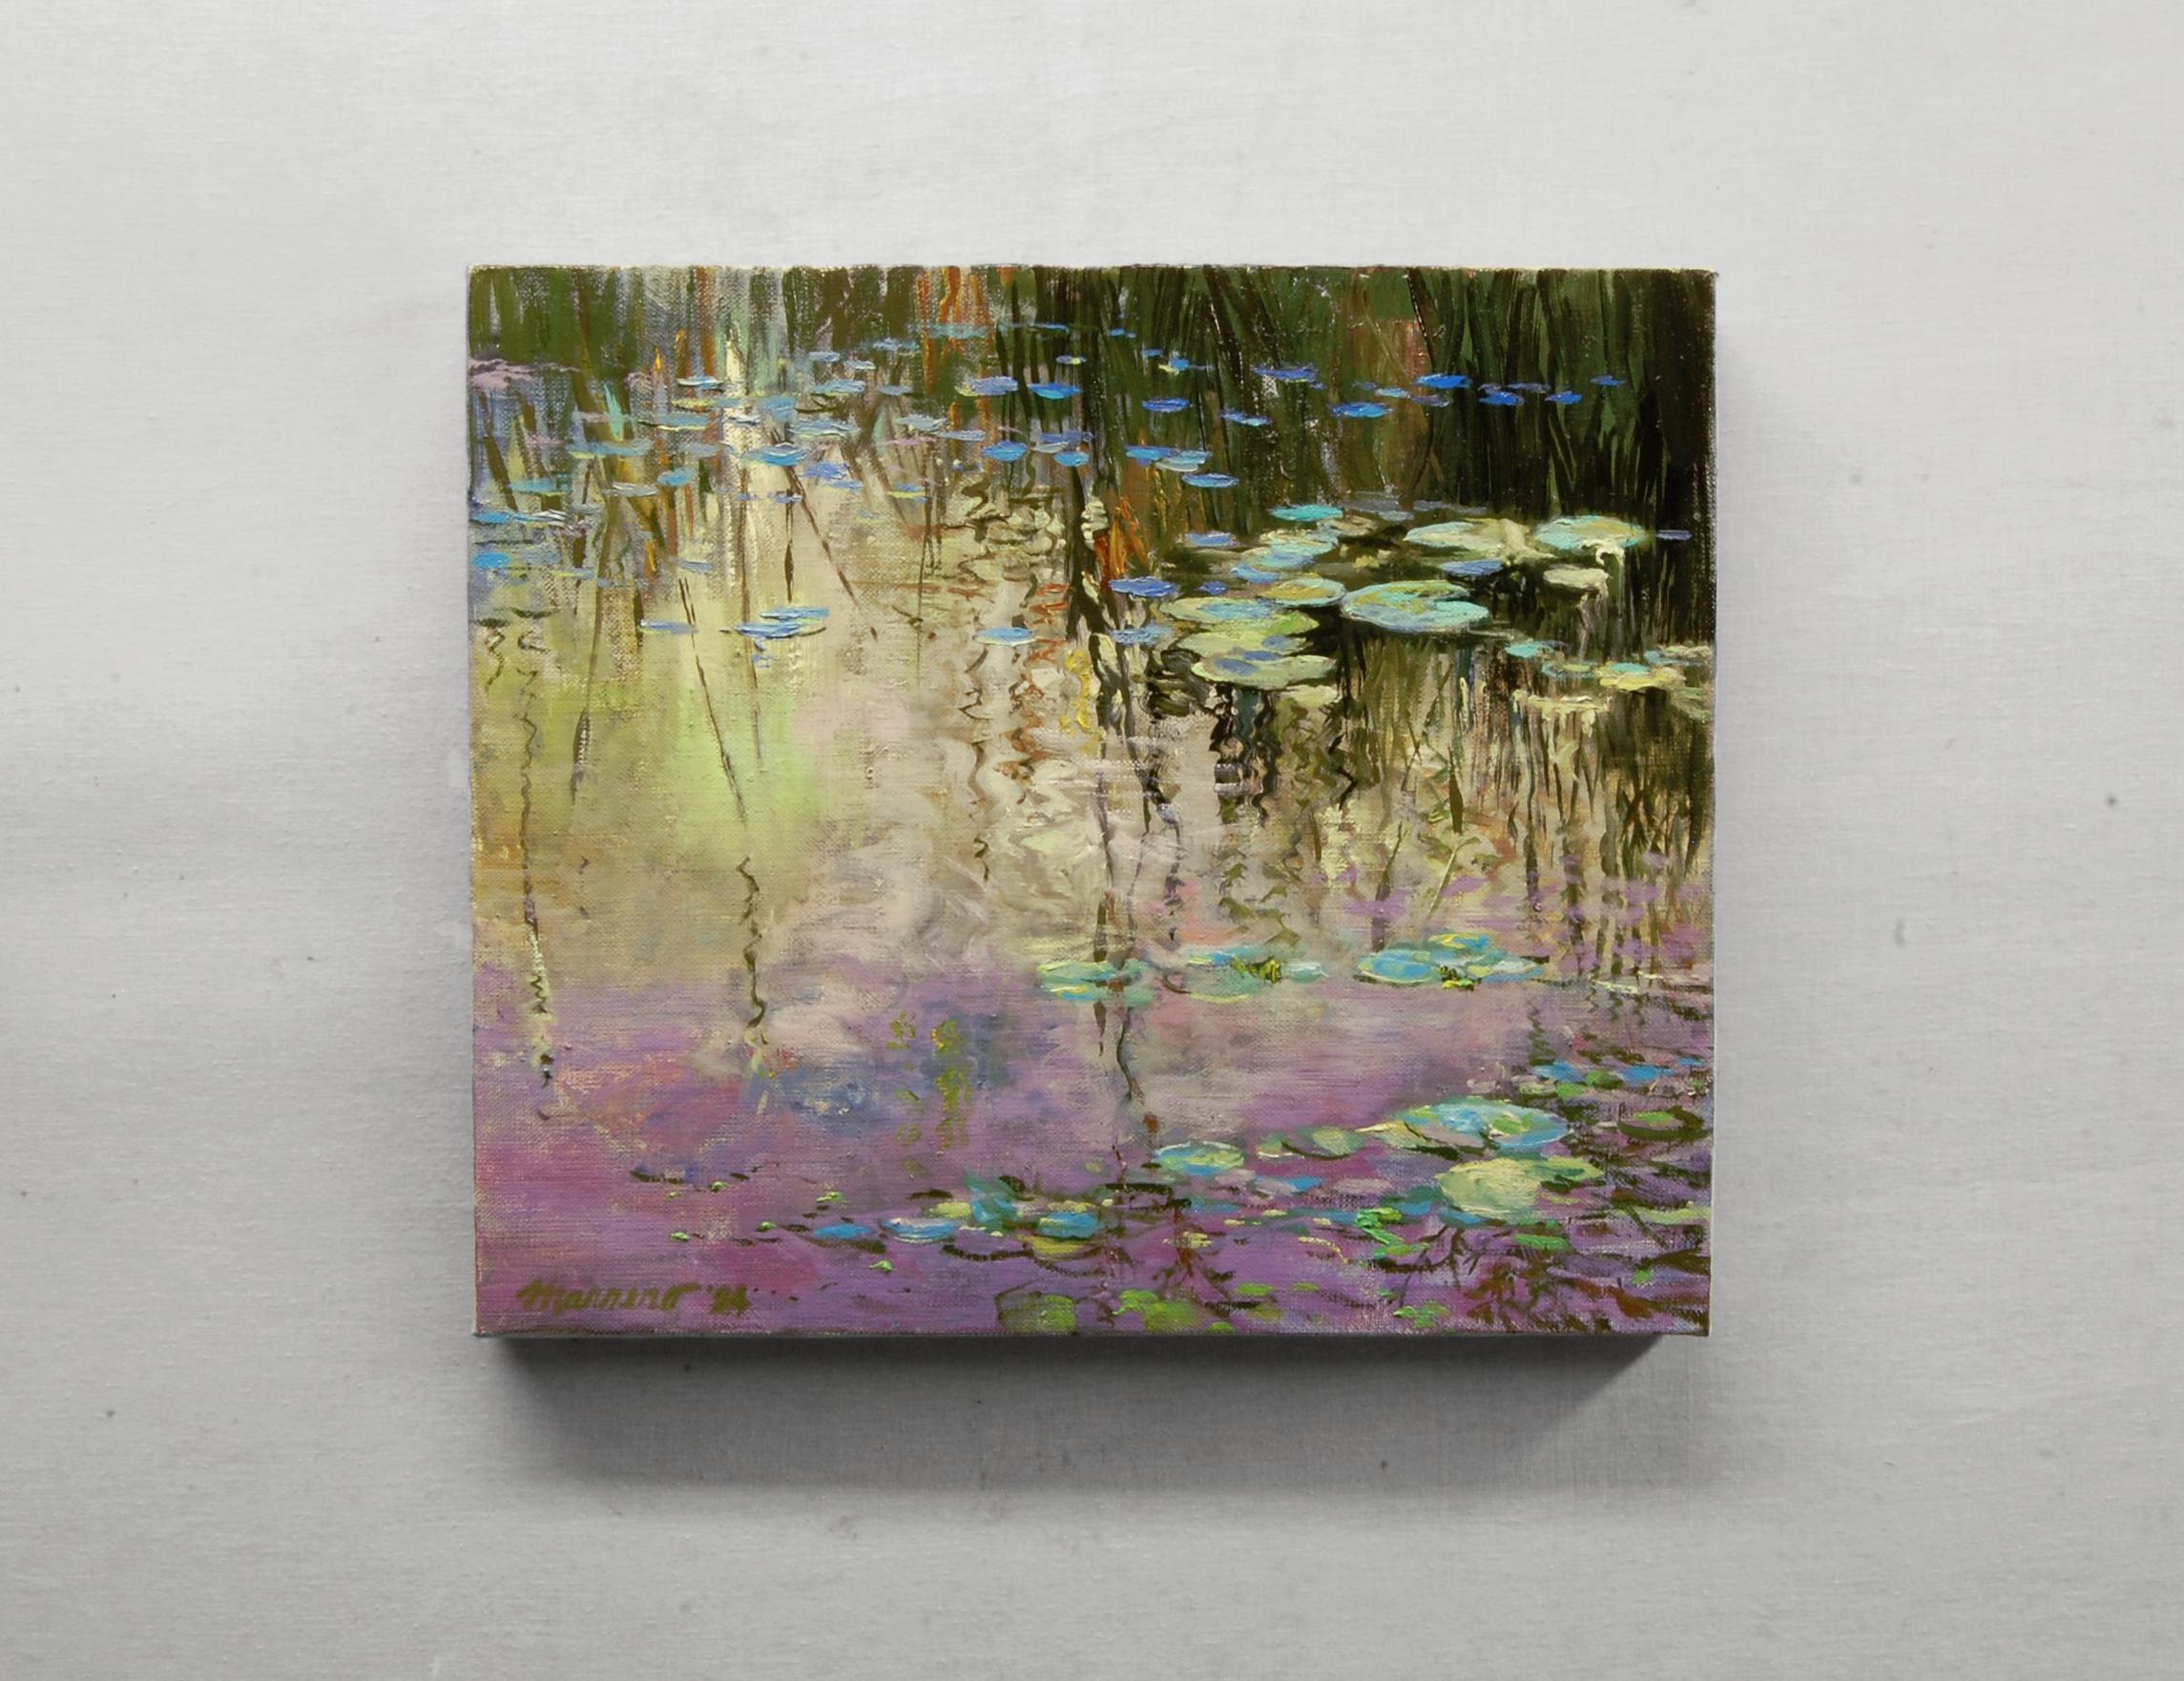 <p>Artist Comments<br>The sky's shifting evening colors reflect on a quiet pond. The water lilies pick up various hues as they recede into the shadier reaches near the reeds. Fluid strokes and subtle colors capture the scene's tranquility. The